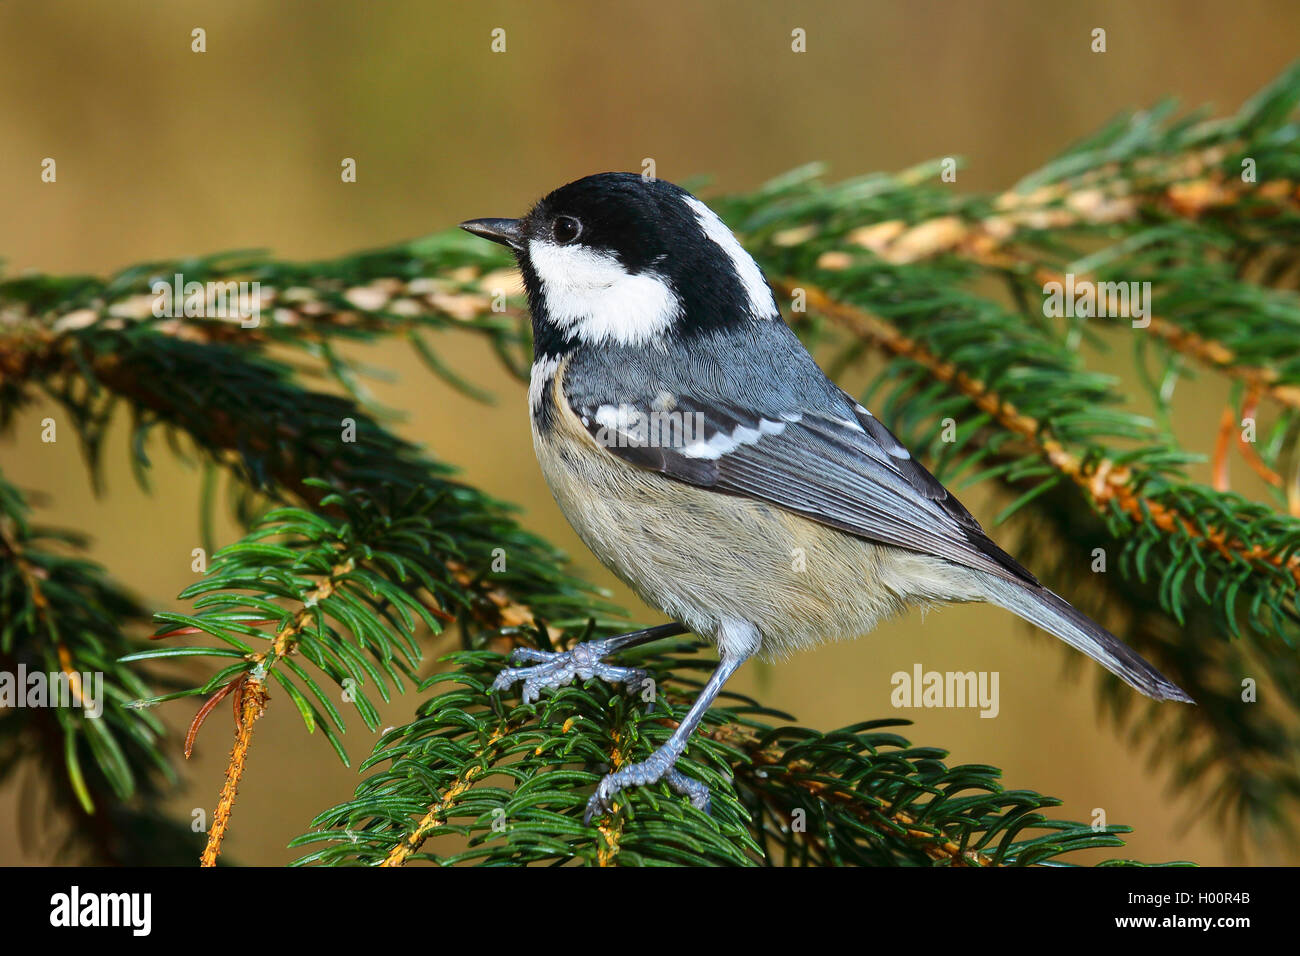 Coal tit (Periparus ater, Parus ater), sits on a twig, Germany Stock Photo